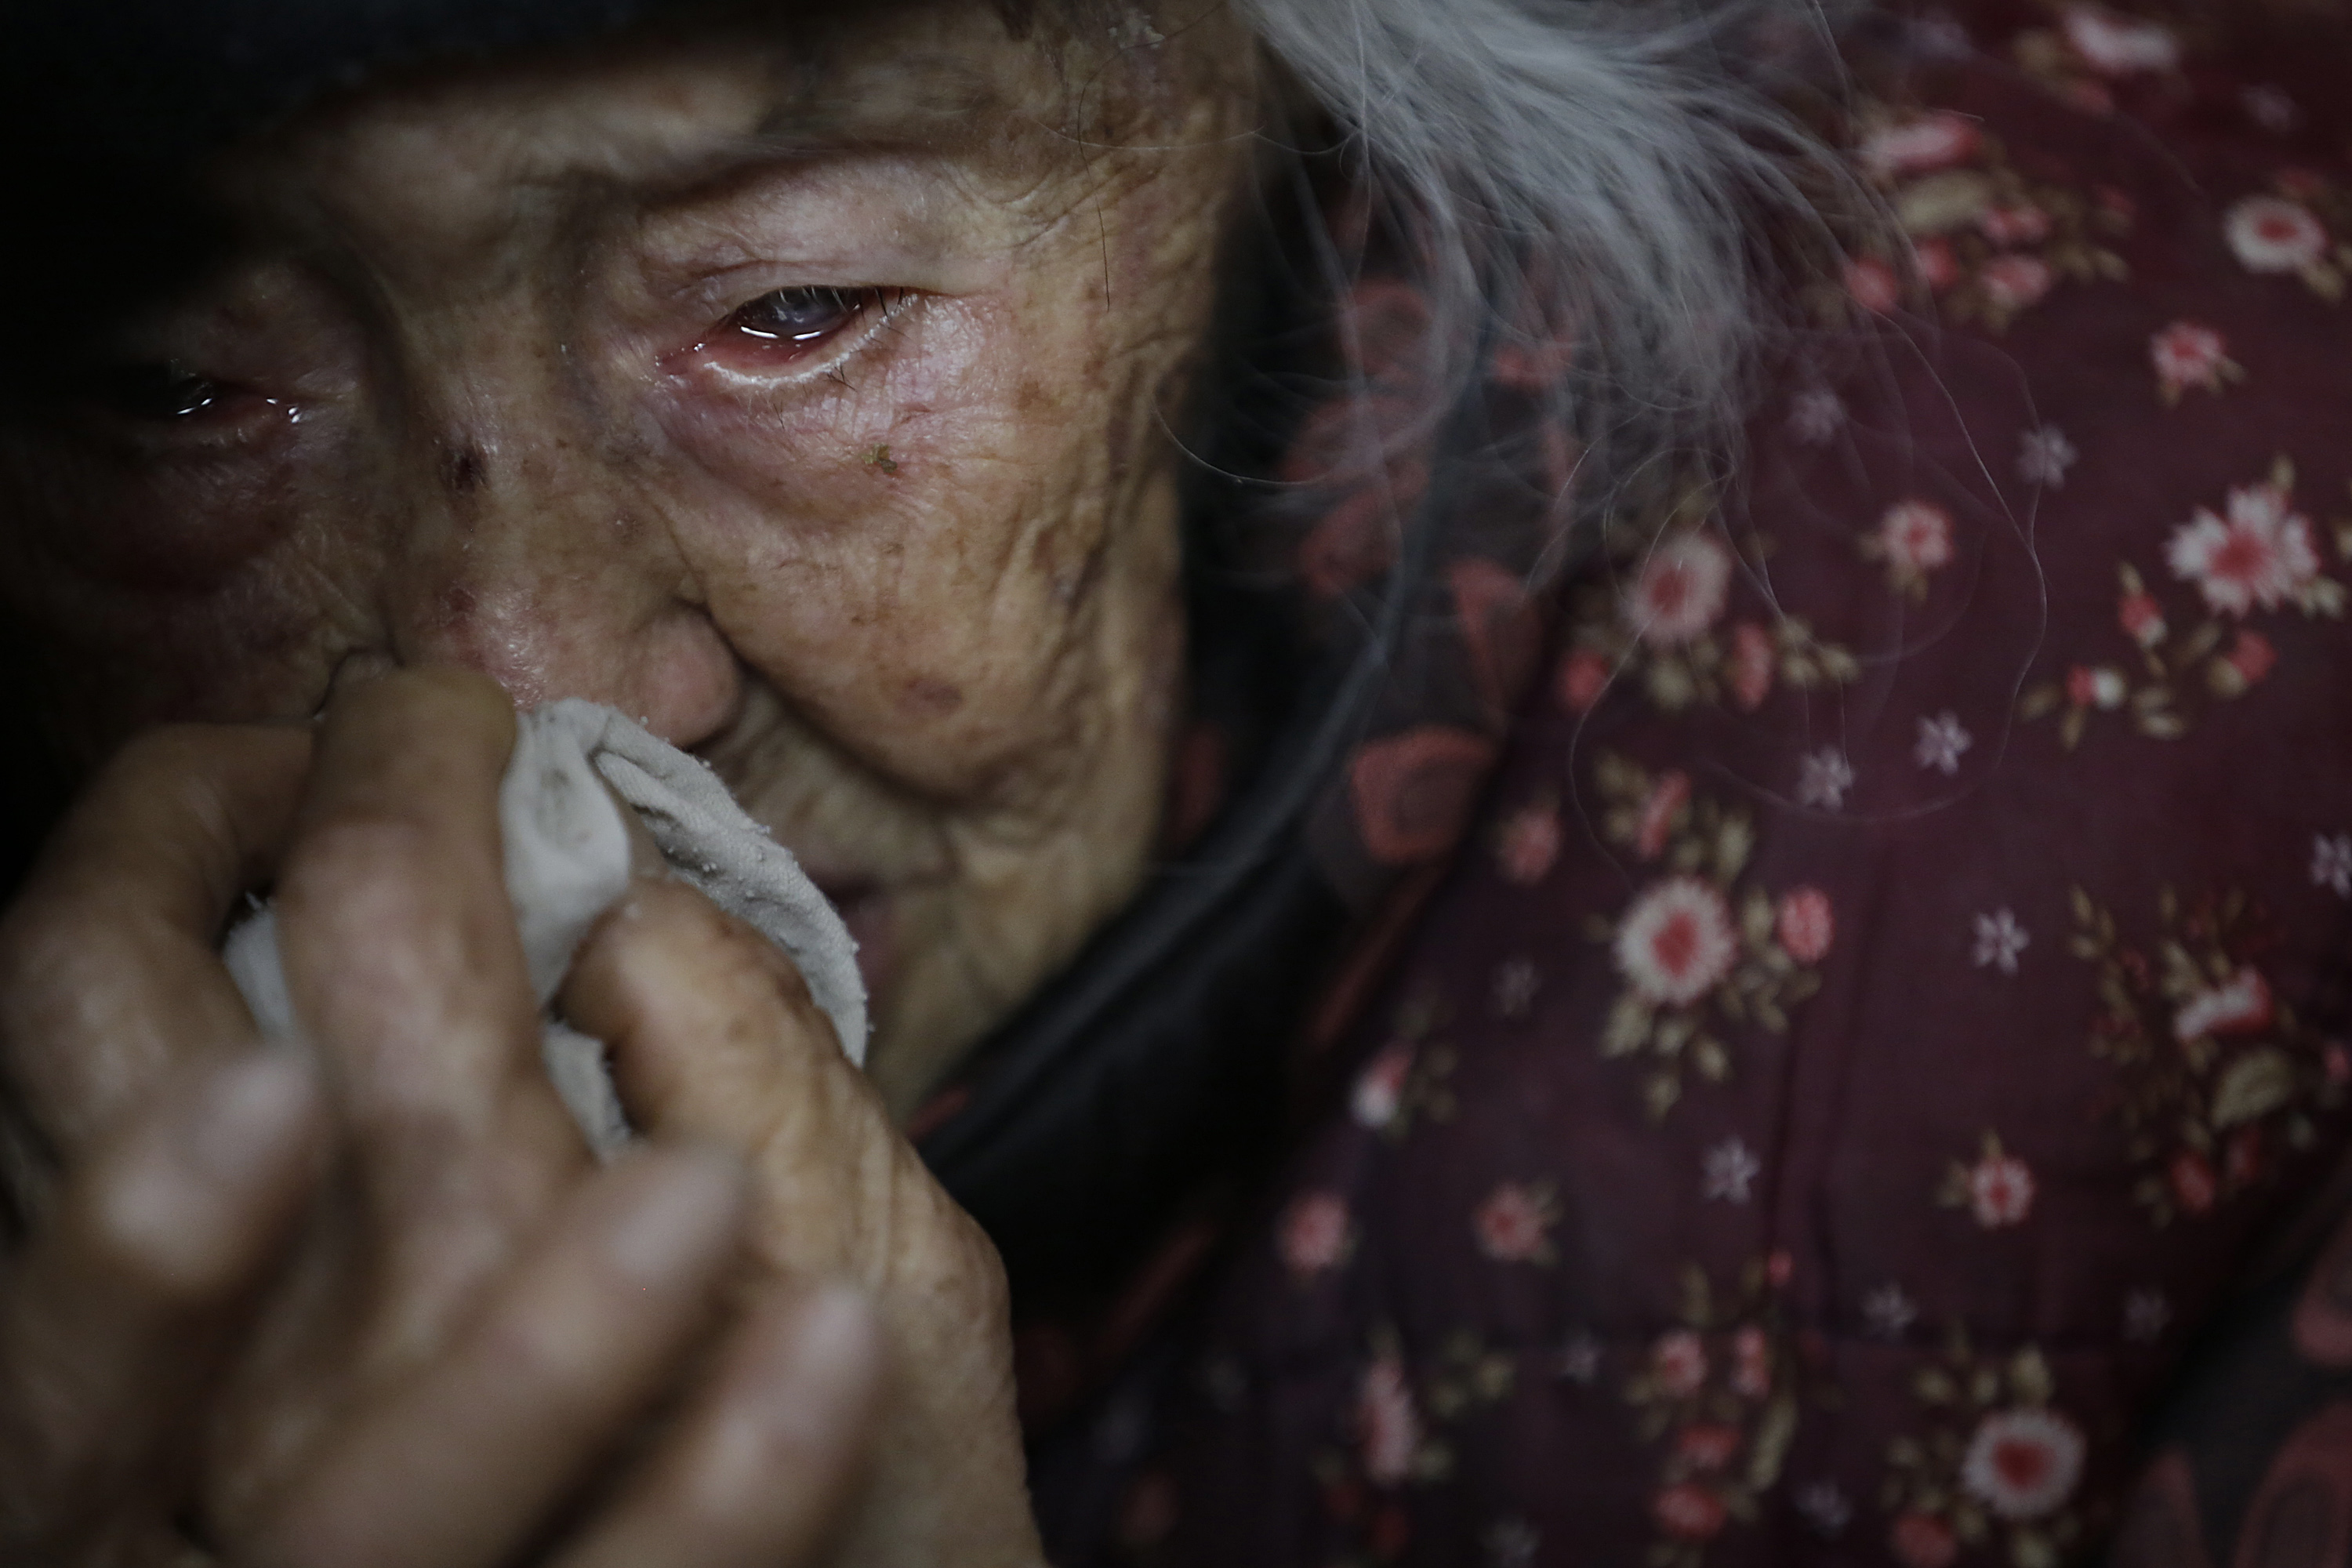 Zhang Zefang, 94, who sued her own children for not taking care of her, cries as she describes the miseries she has endured throughout her life. Photo: AP